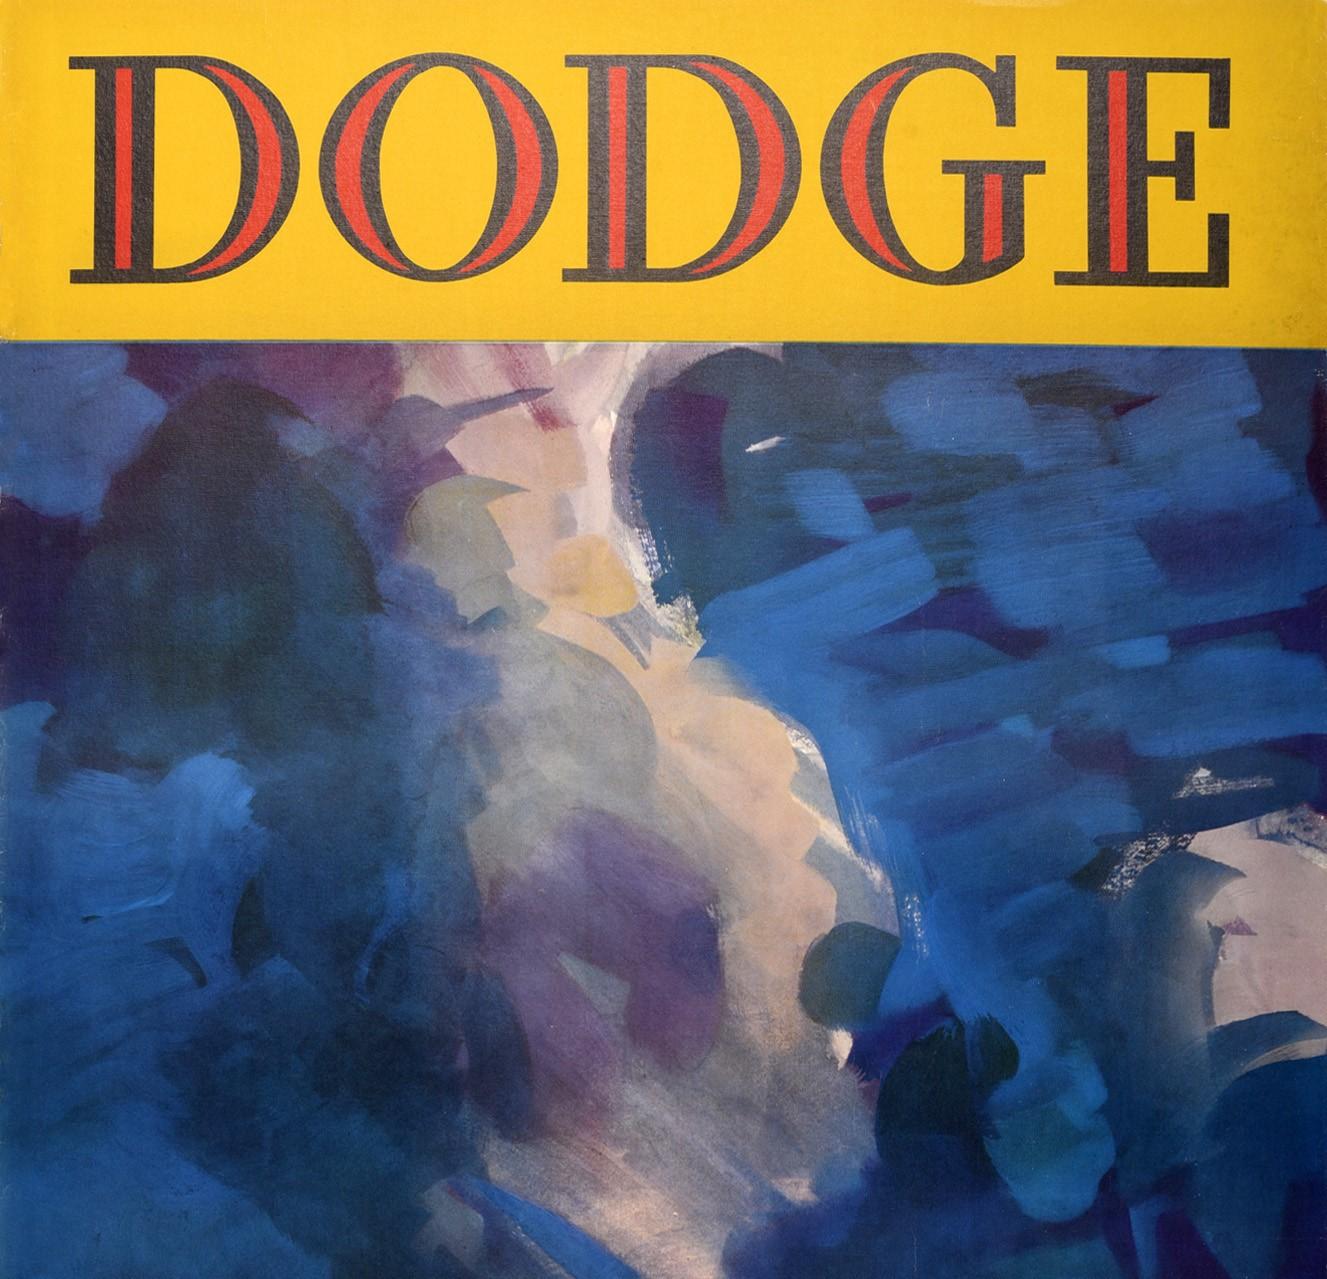 Original vintage advertising poster for Dodge featuring a stunning design showing a shiny sleek Art Deco classic car in front of a dramatic blue shaded background. Founded in 1900, Dodge is an American automobile brand manufacturing cars and trucks